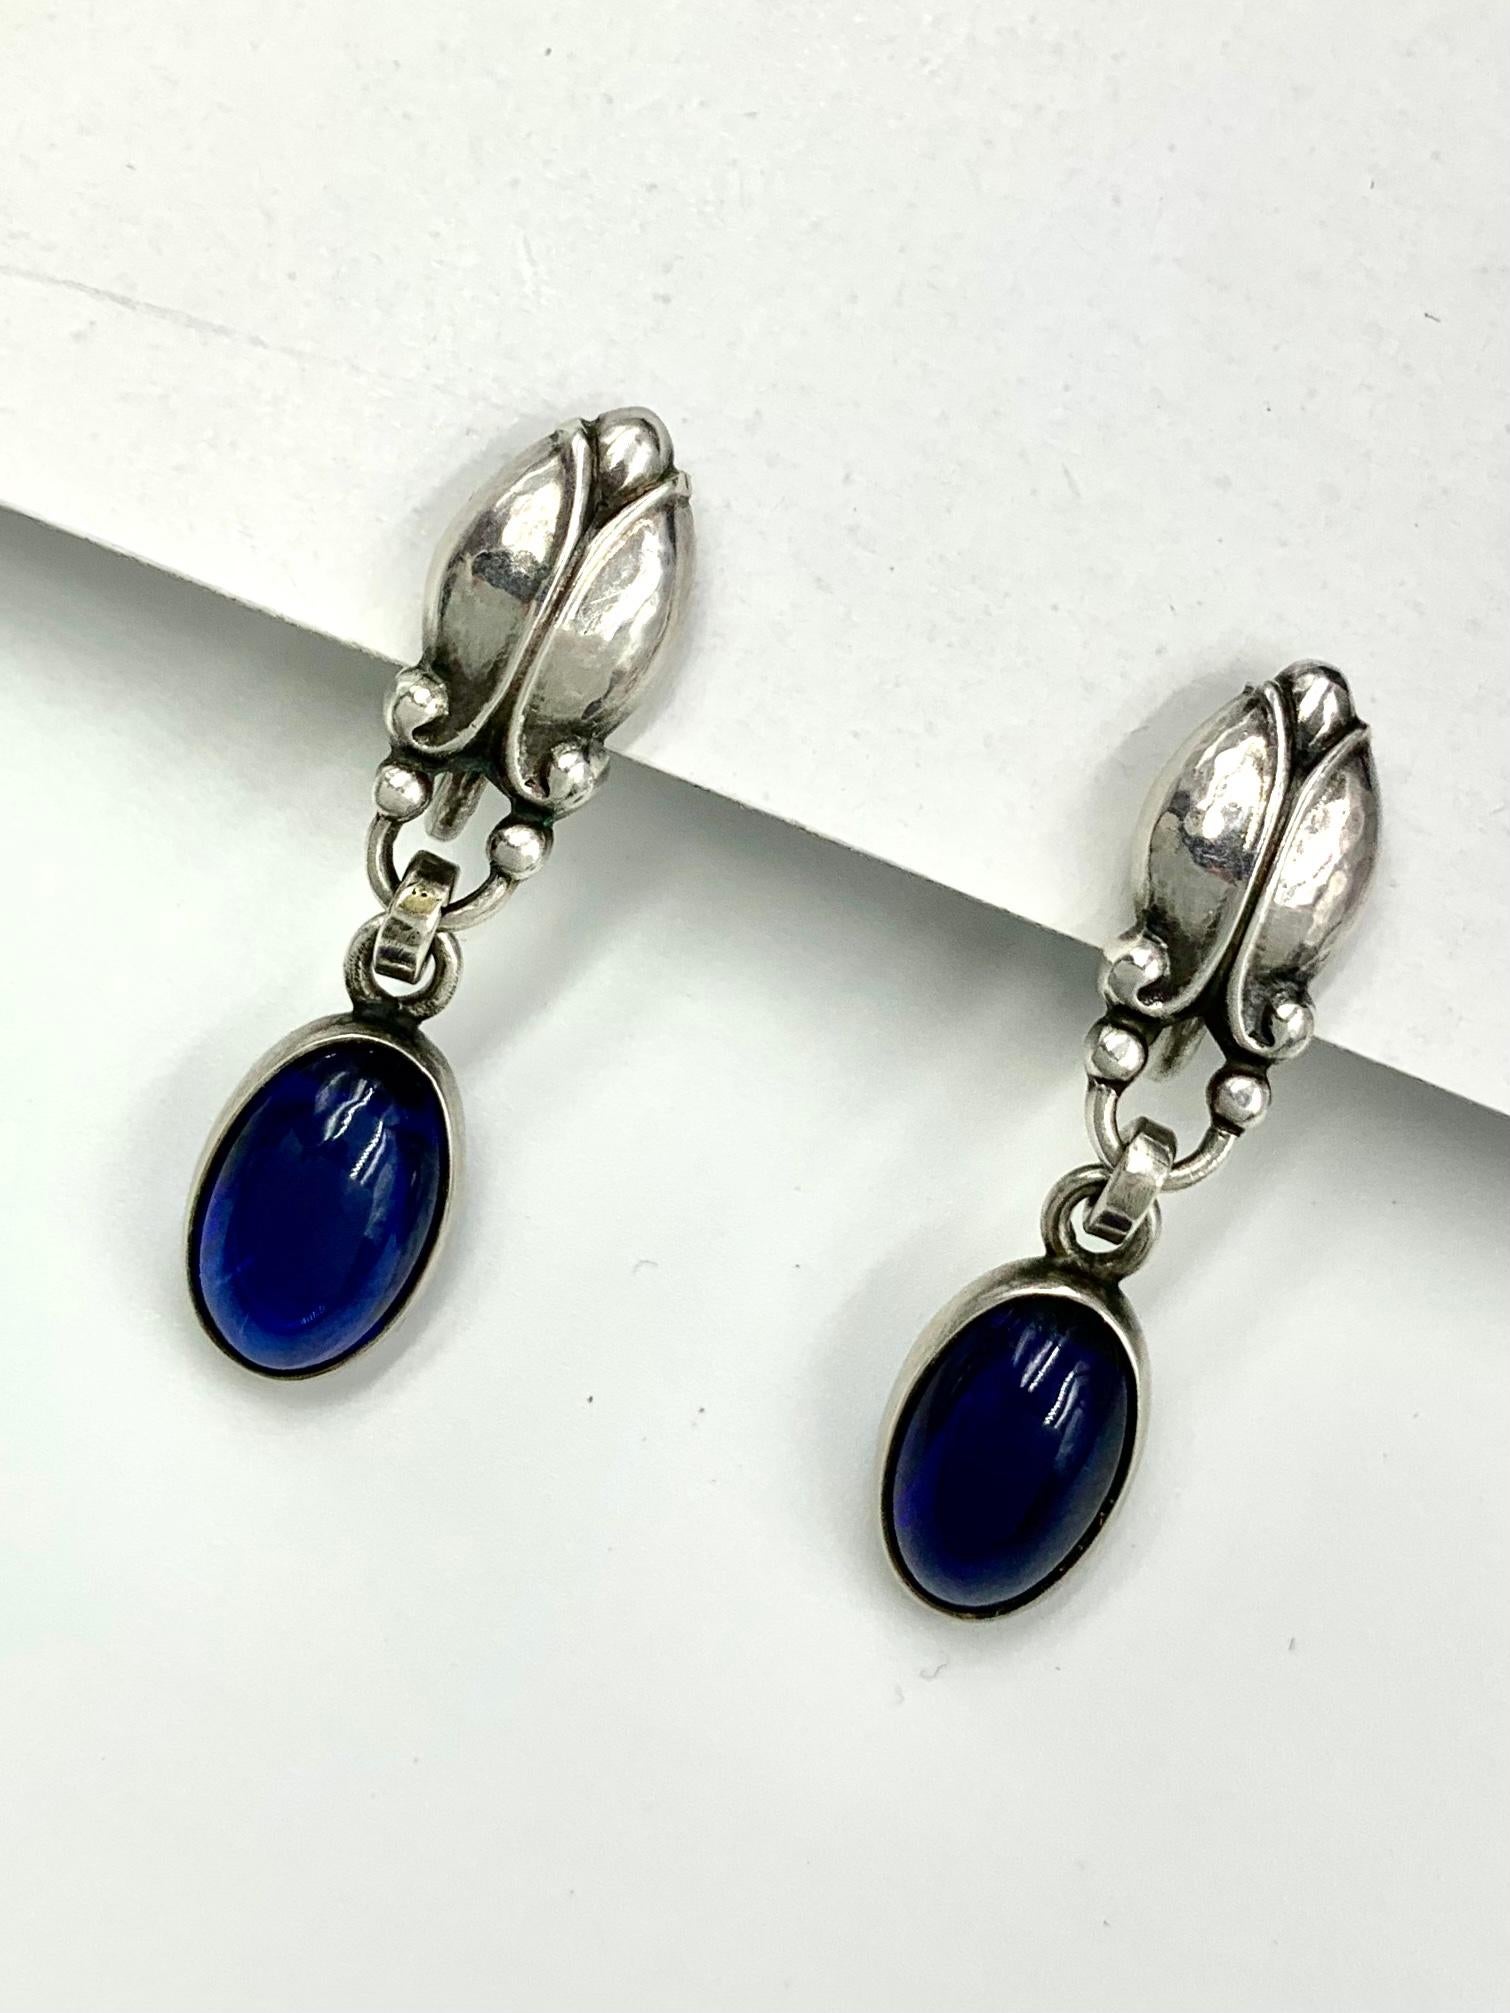 Fine, rare Georg Jensen cabochon sapphire and sterling silver Moonlight Blossom Model 17 earrings
Designed by Georg Jensen himself, this beautiful scarce model features fine silverwork and oval cabochon blue sapphires.
Marks: Georg Jensen, 17,